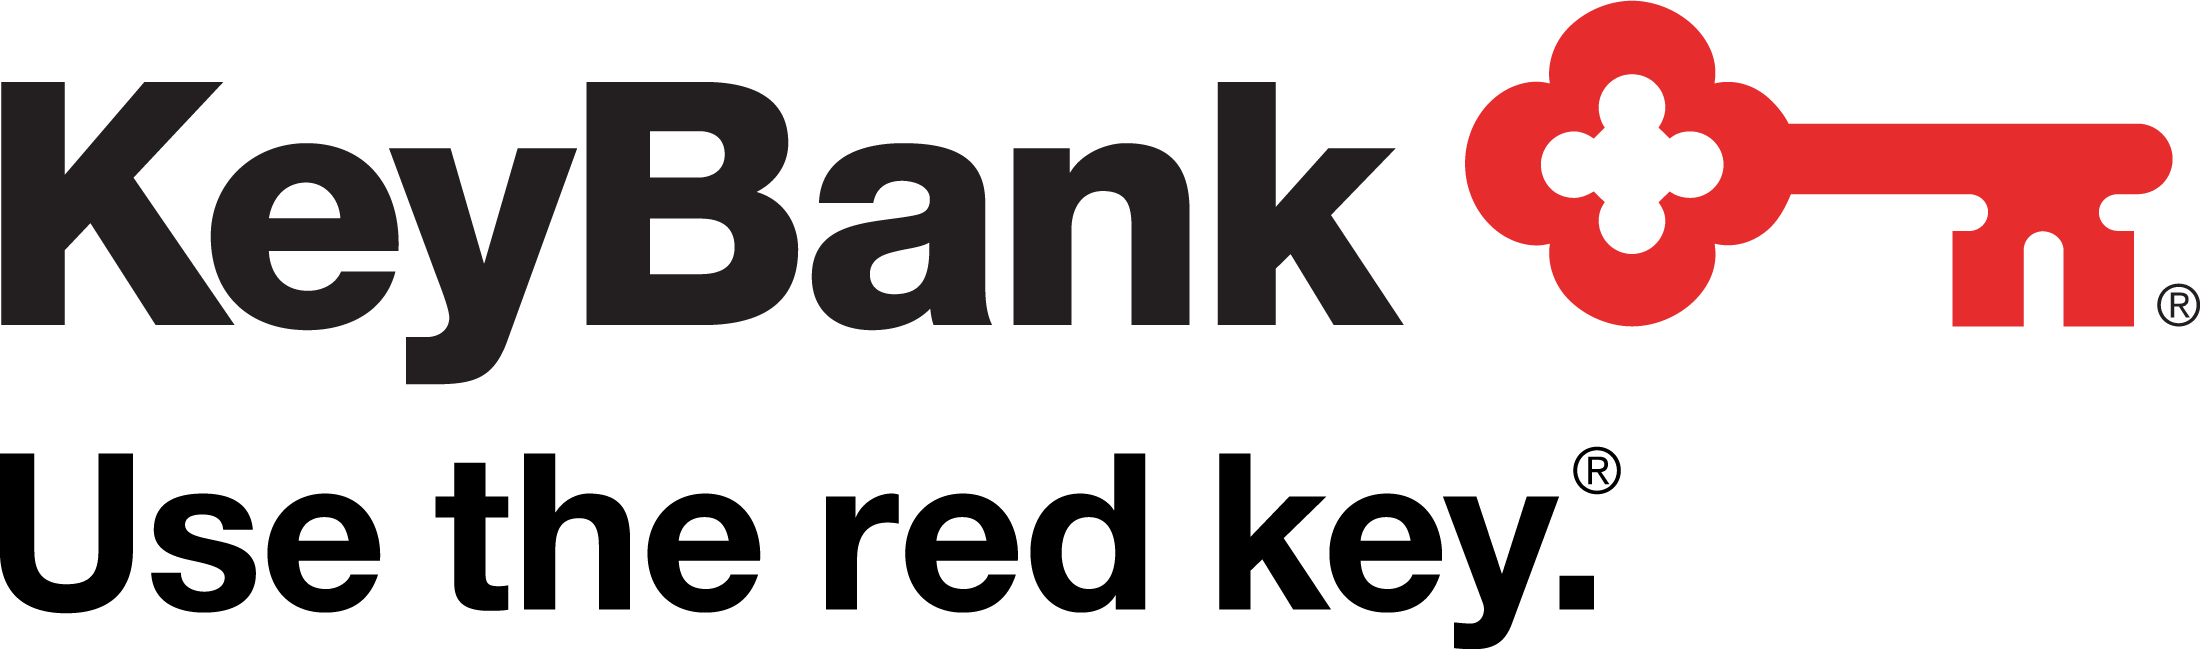 keybank logo - Equipment  finance helps drive growth in the agriculture industry